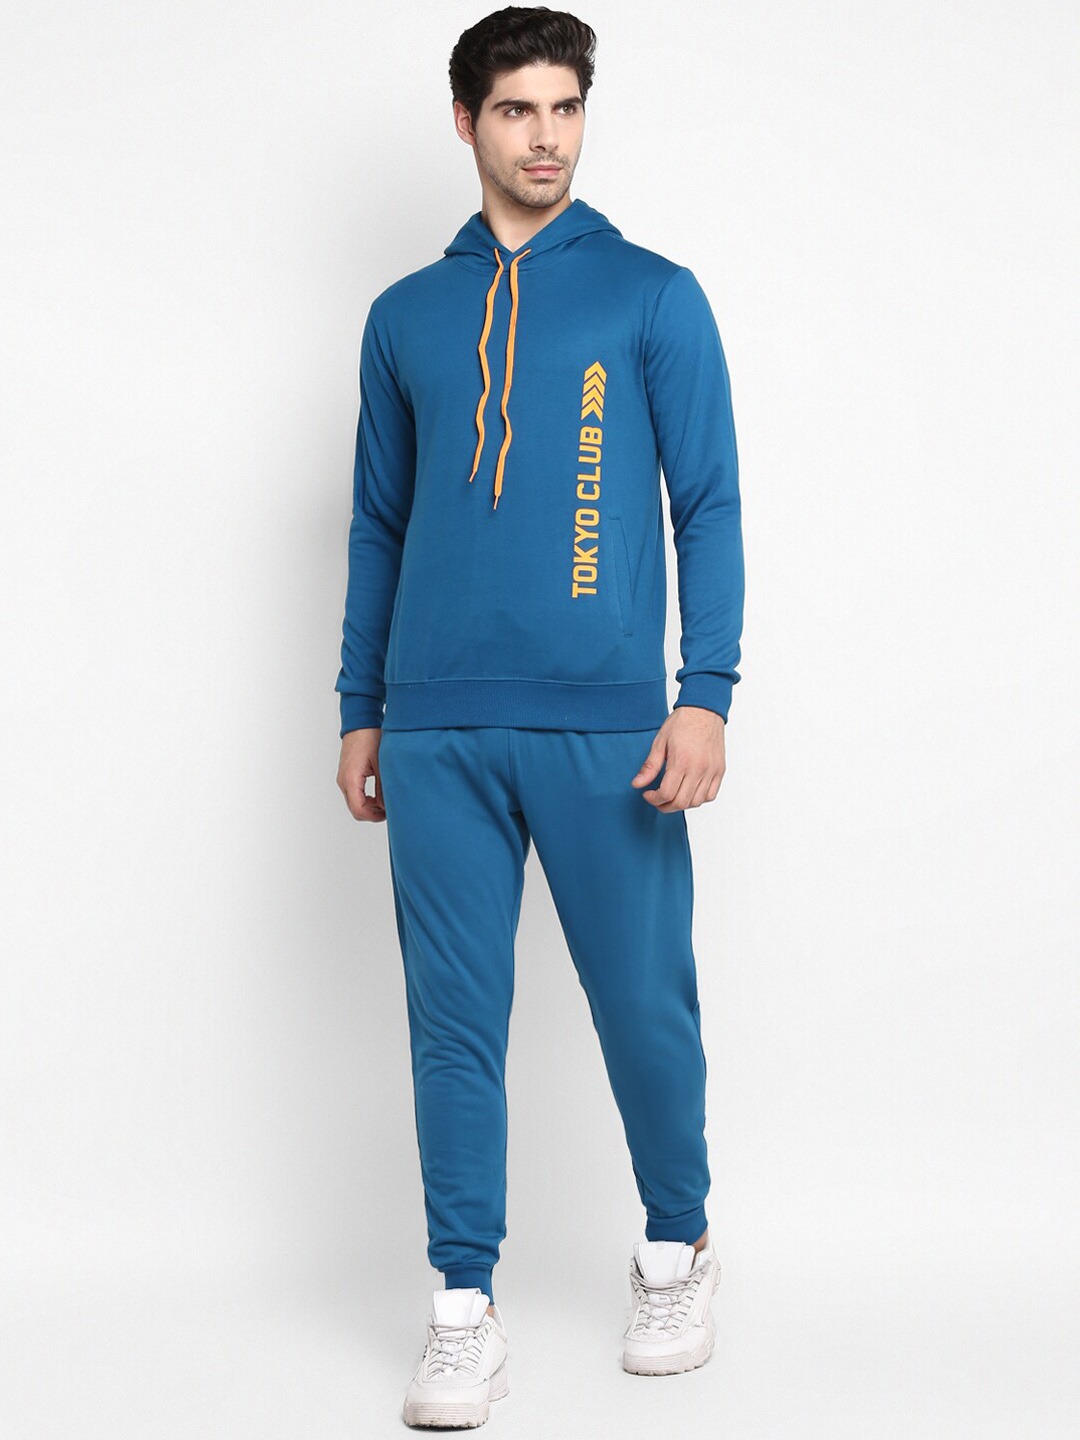 Clothing Tracksuits | OFF LIMITS Men Blue & Orange Printed Hooded Tracksuits - PJ51662